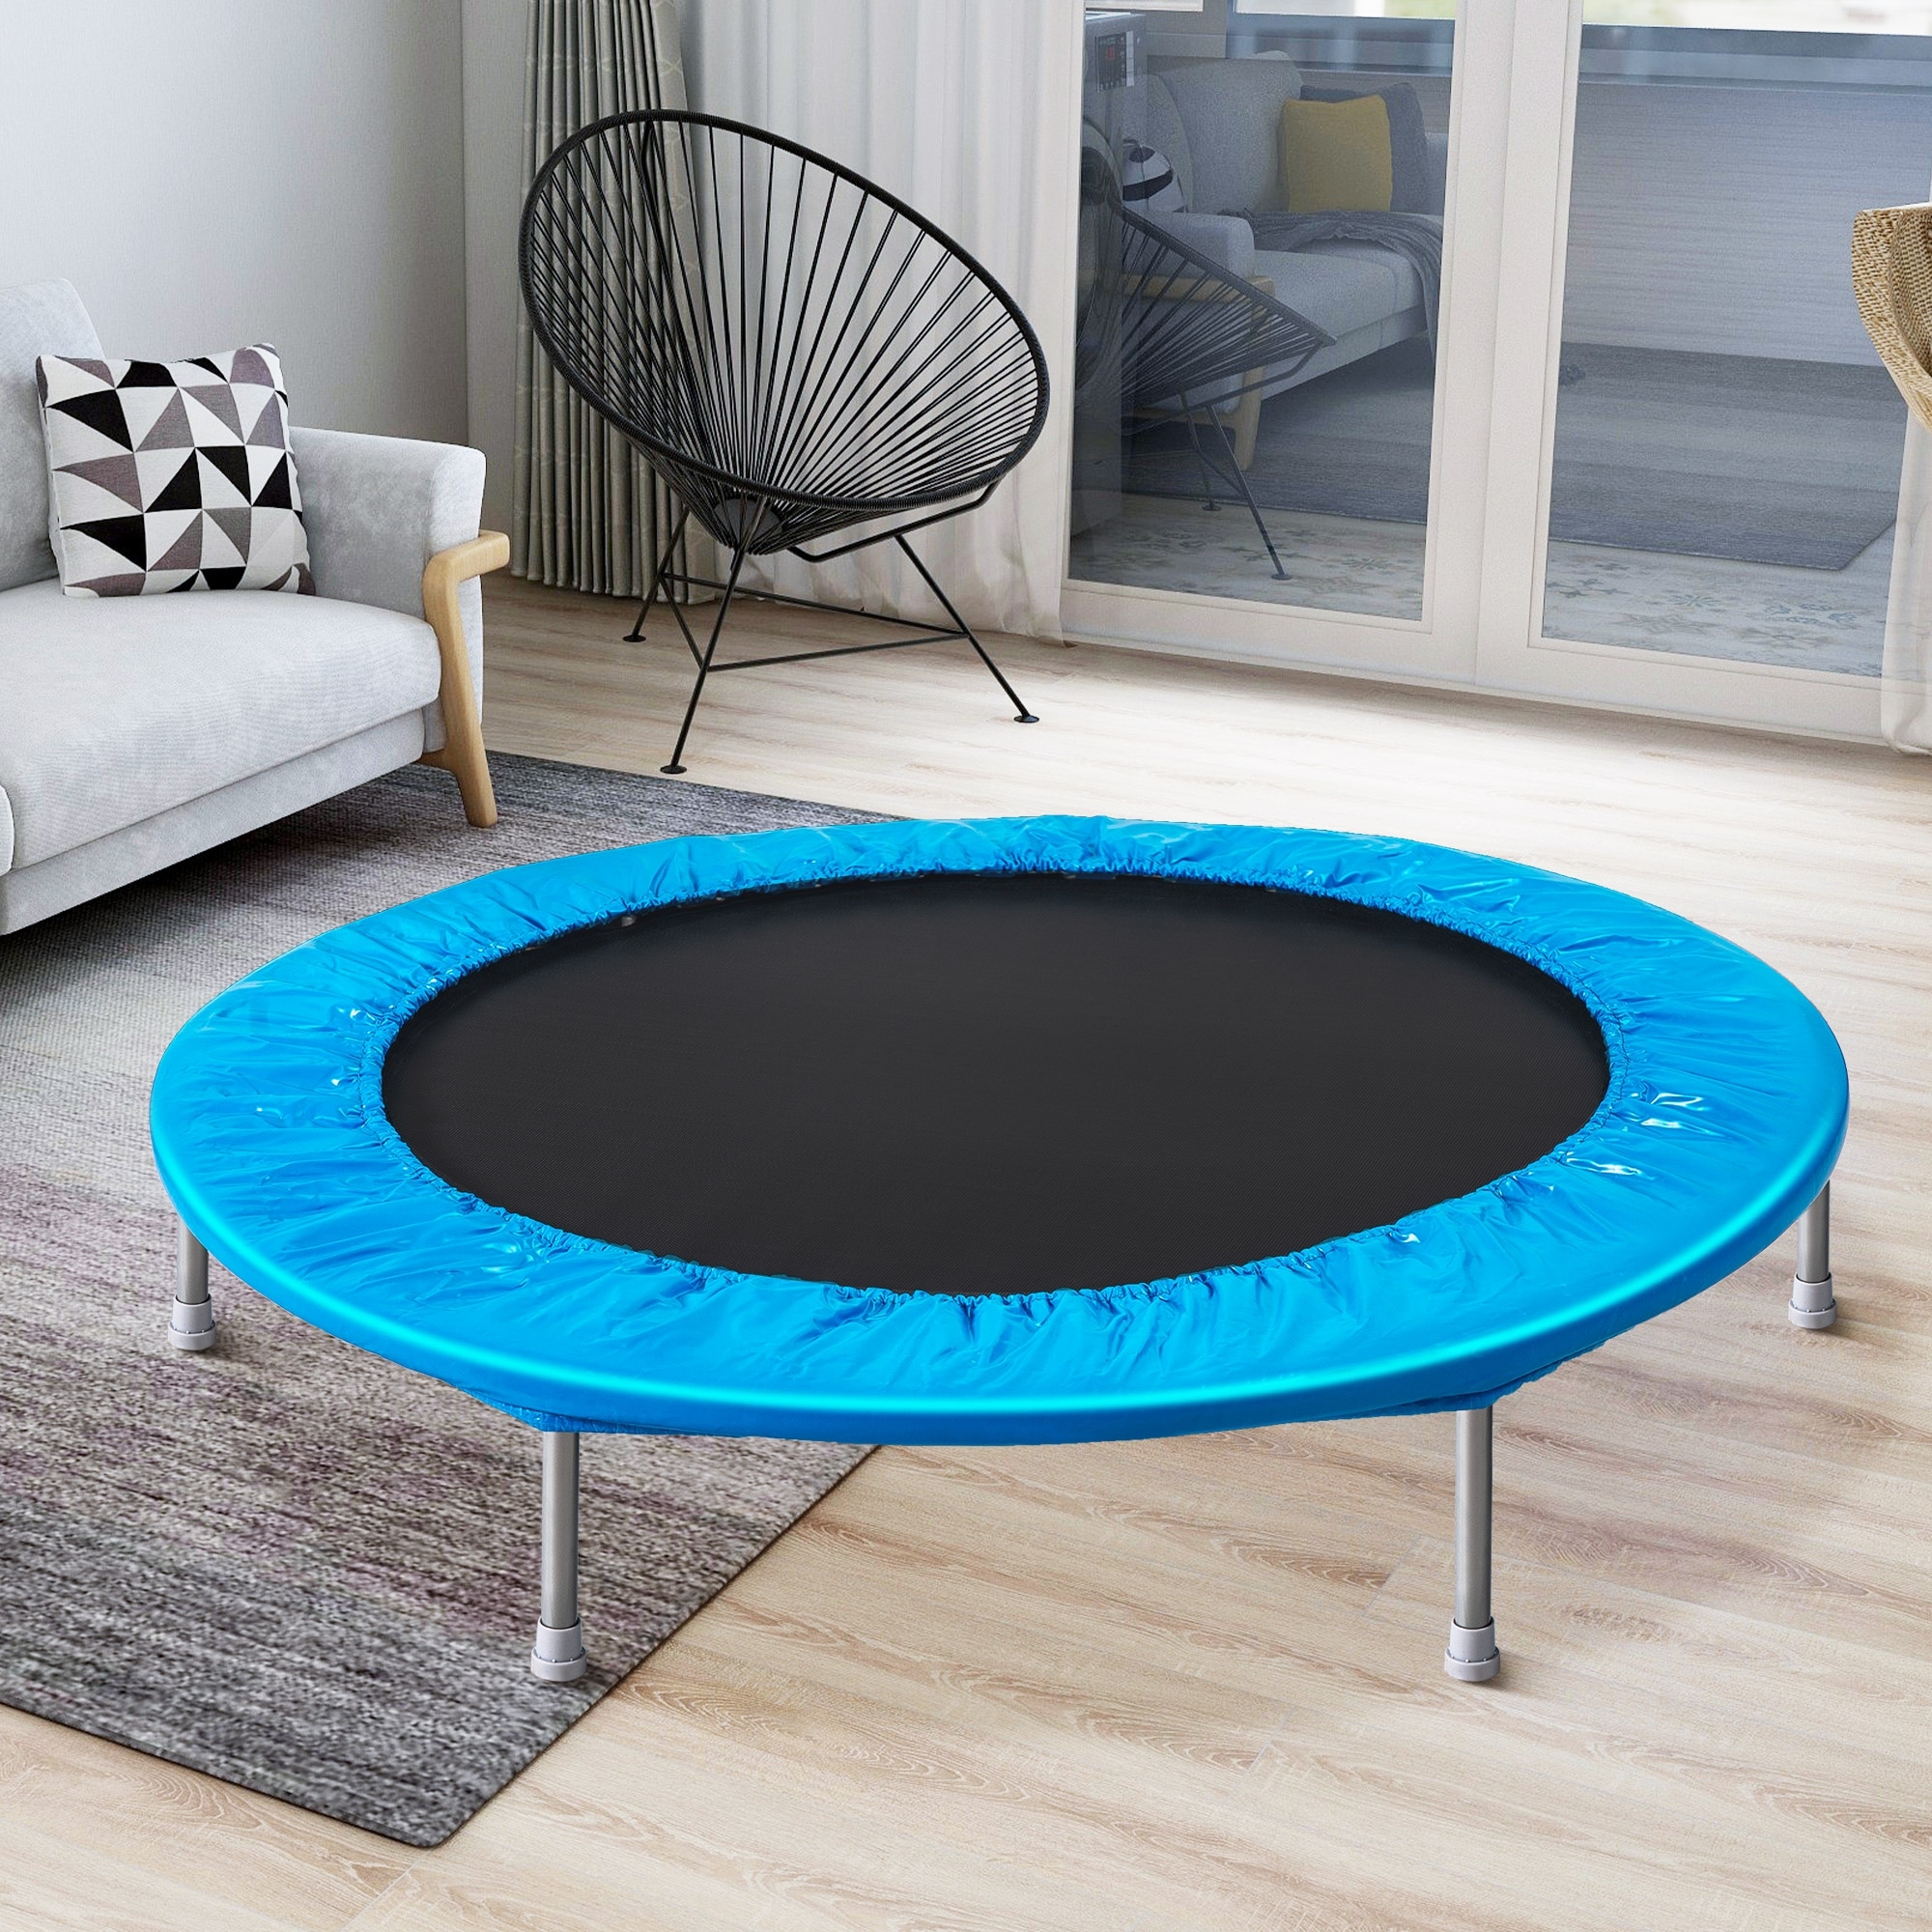 Joyin Blue Mini Round Trampoline for Kids and Adults - Portable and  Foldable - Indoor/Outdoor Use - Supports up to 250 lbs. in the Trampolines  department at